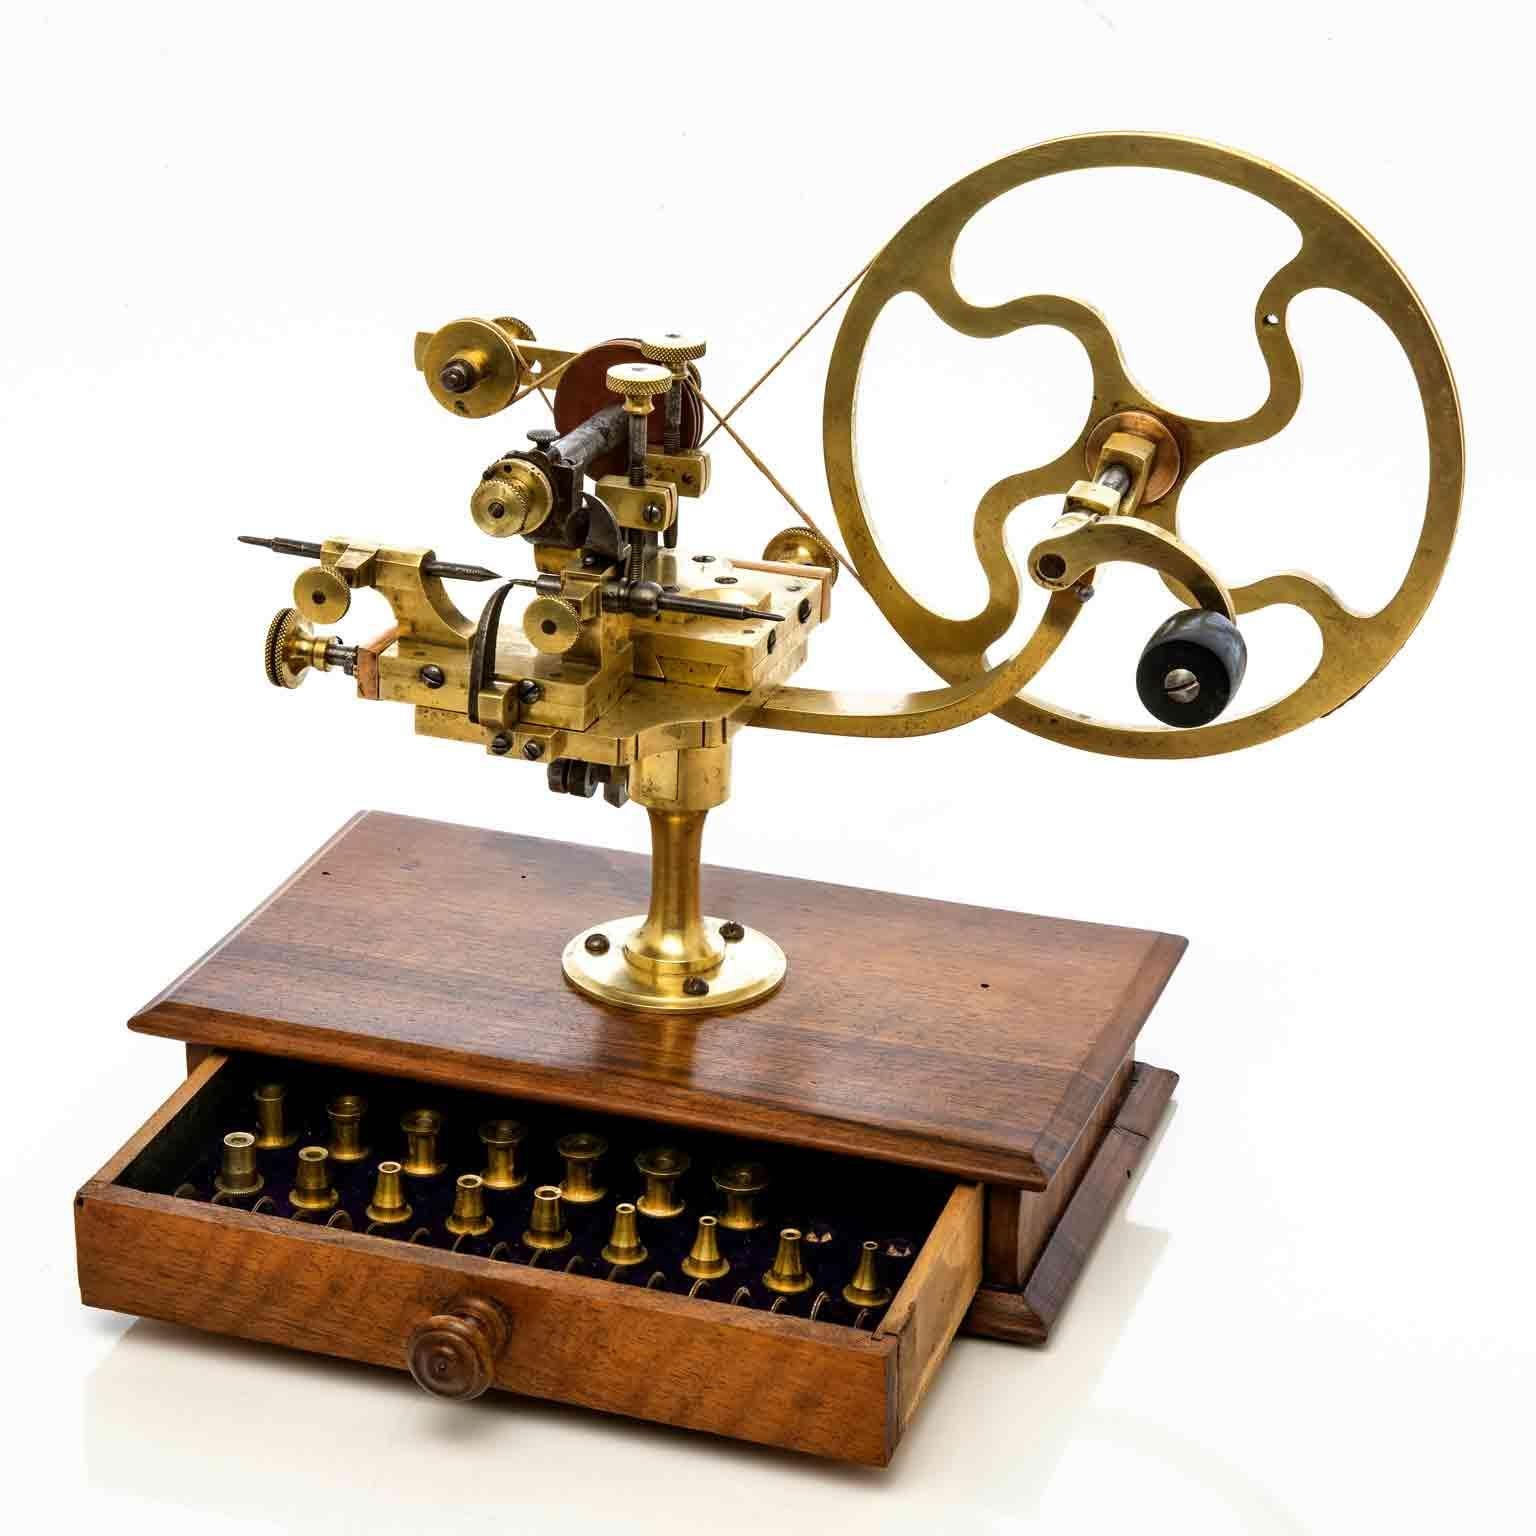 A rare gear wheel rounding up machine for watchmakers, machine à arrondir ingenuous watchmaking machine used to true up watch wheels and shape gear teeth, mounted to a walnut box with frontal drawers containing accessories, two missing. 

This